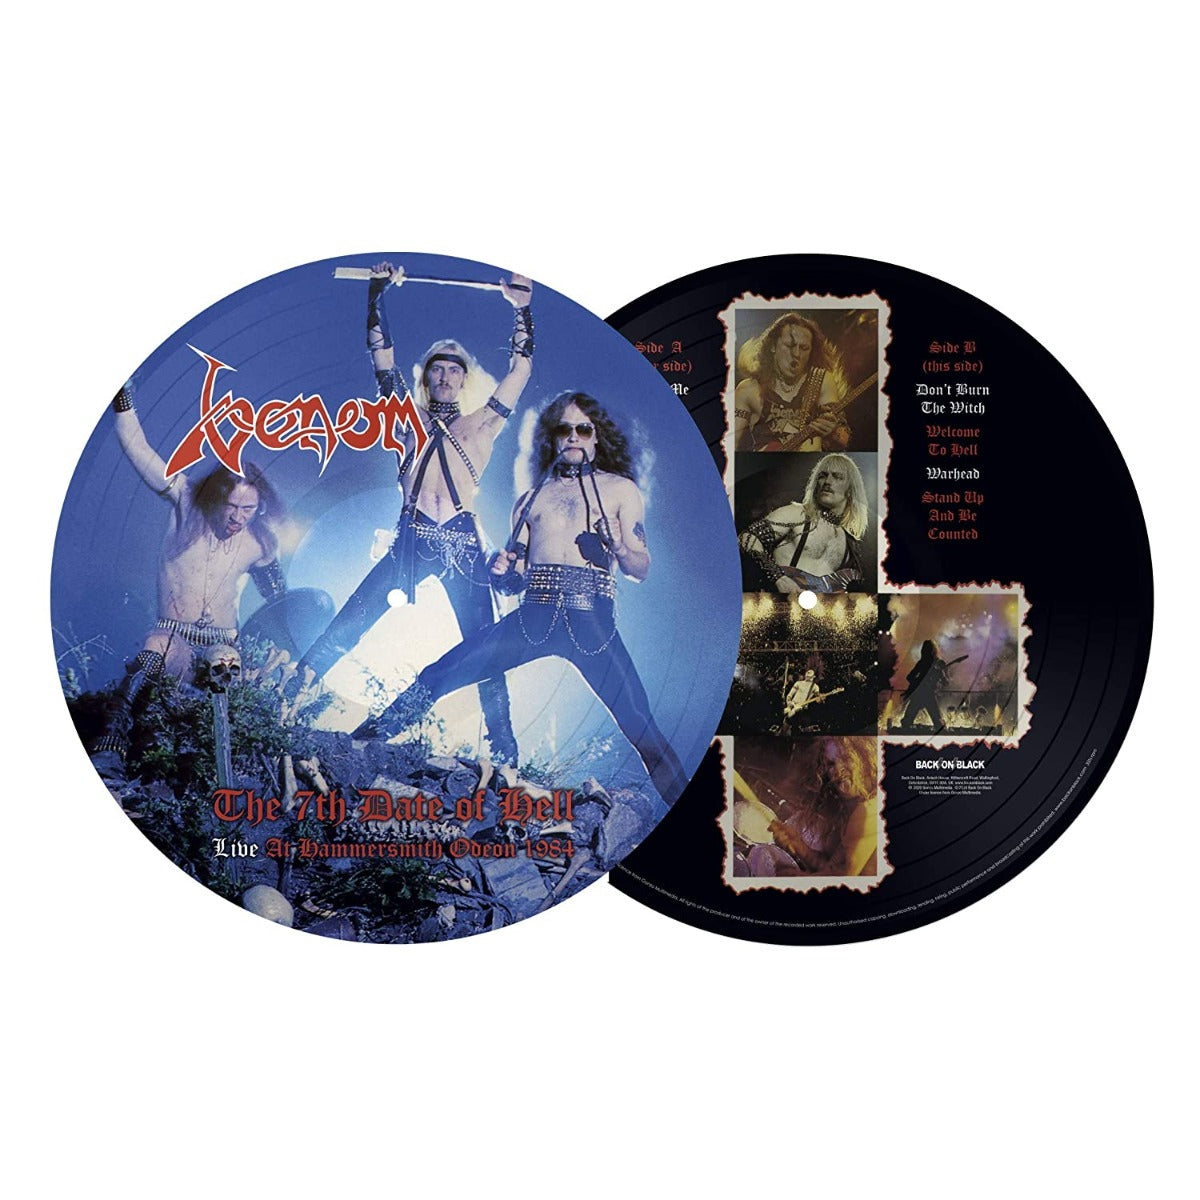 Venom - 7th Date Of Hell: Live At Hammersmith 1984 (Picture Disc) [Import]